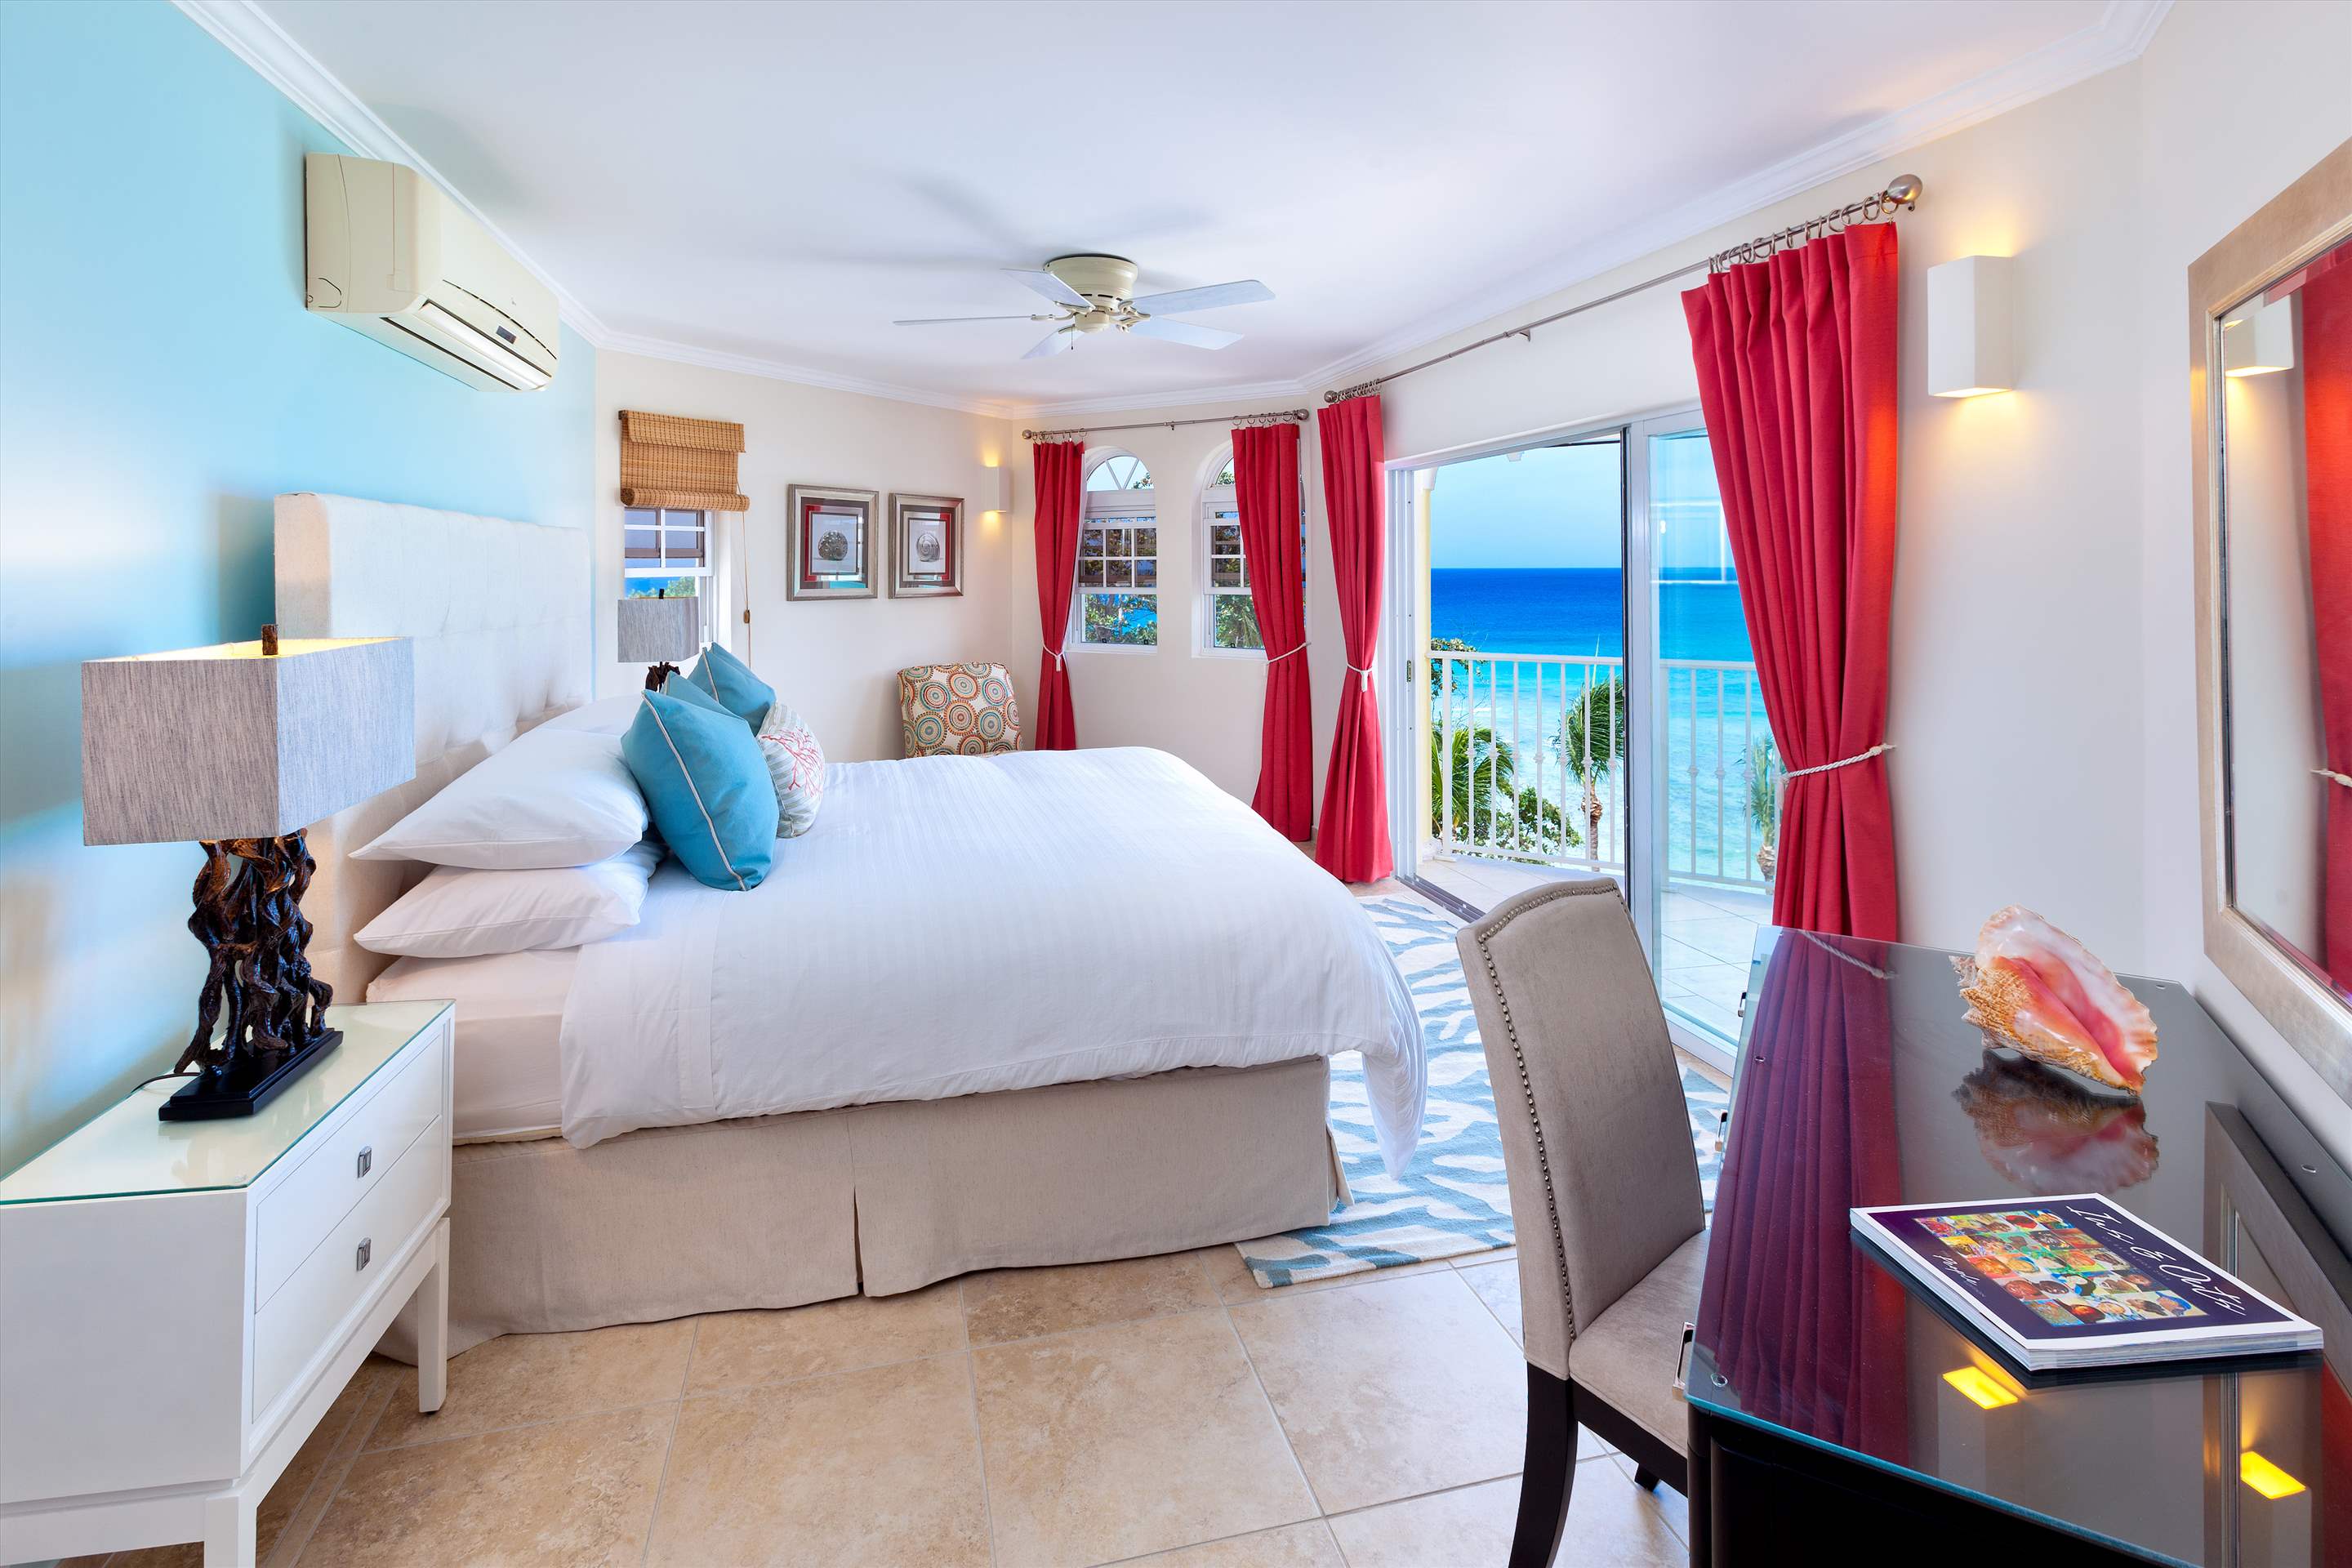 Sapphire Beach 517, 2 bedroom, 3 bedroom apartment in St. Lawrence Gap & South Coast, Barbados Photo #6